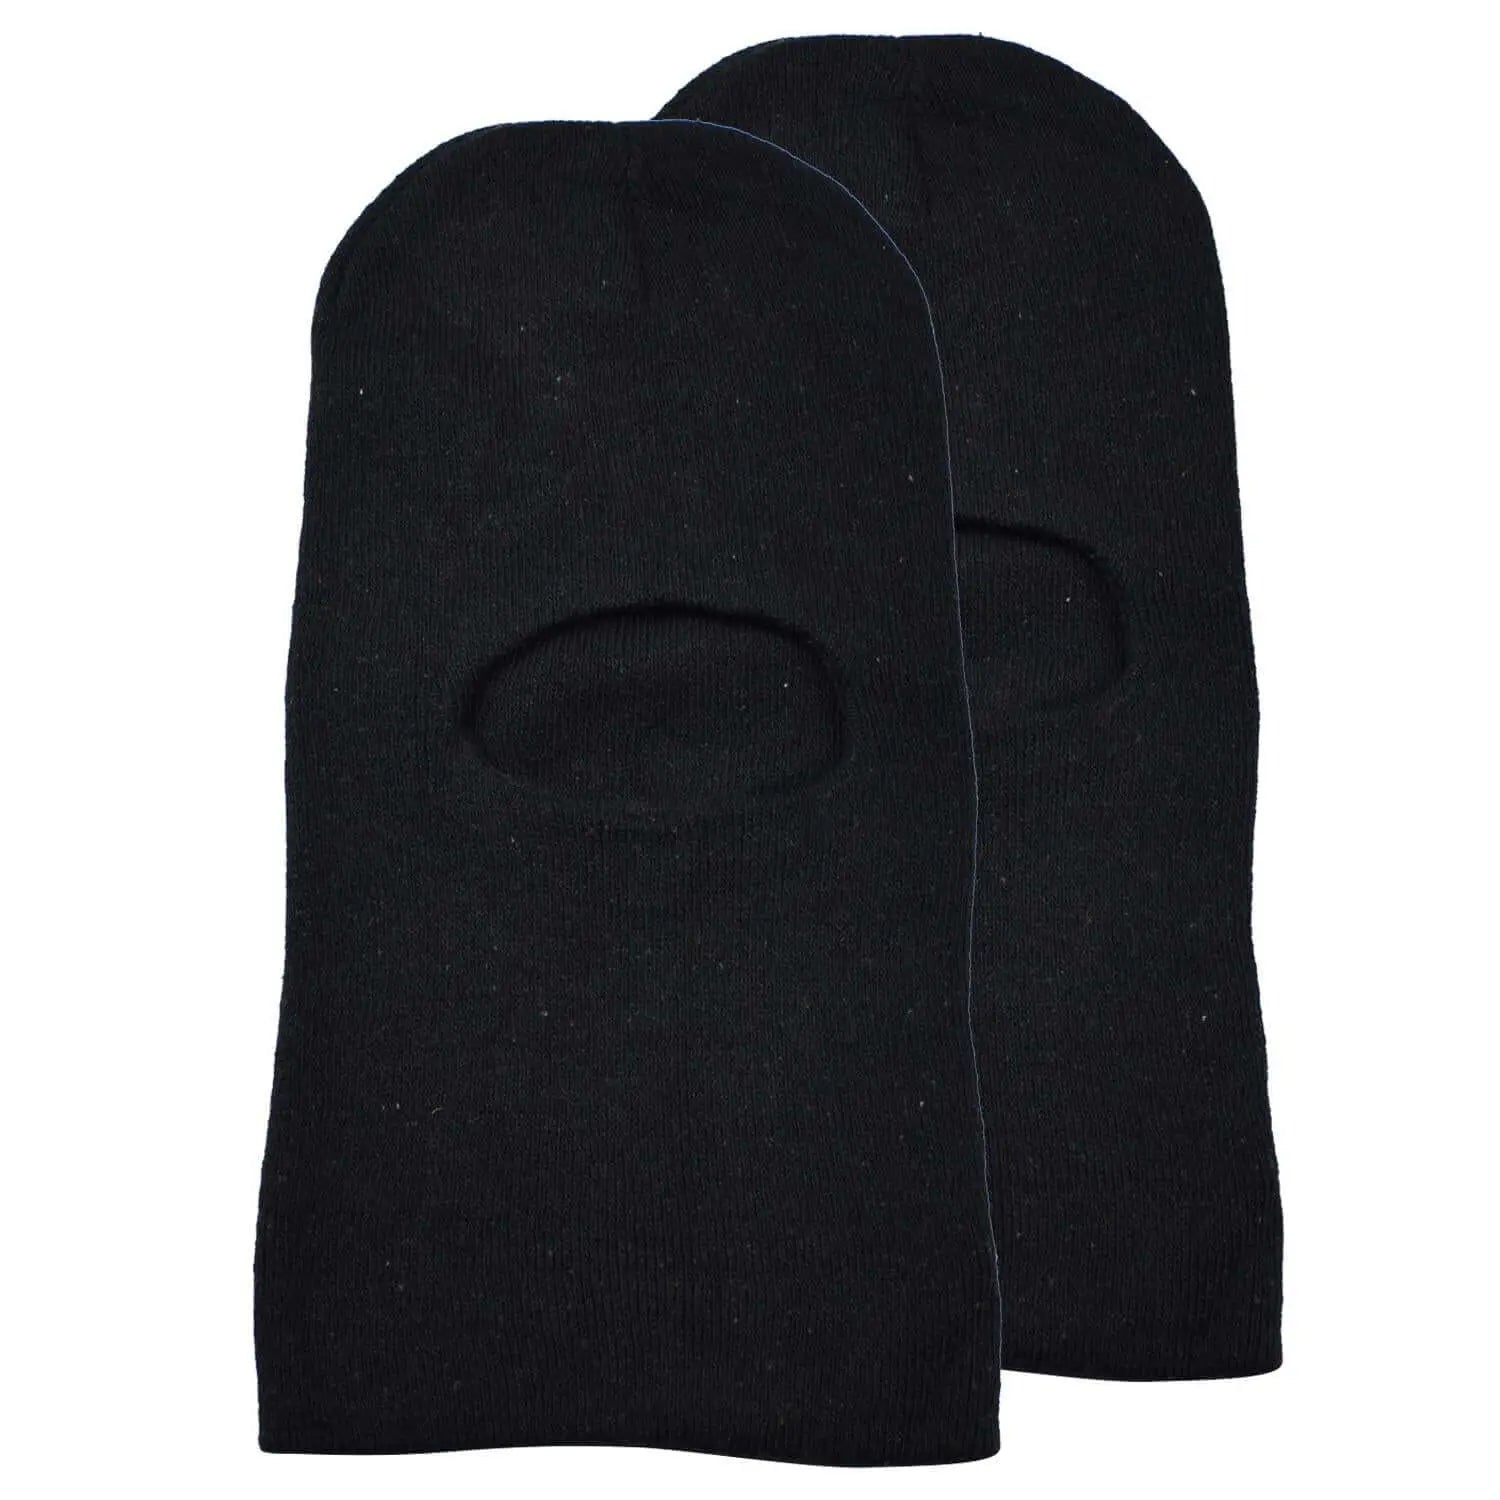 Two black knit beanies on display, Multifunctional Cotton Blend Balaclava Face Cover Hat.